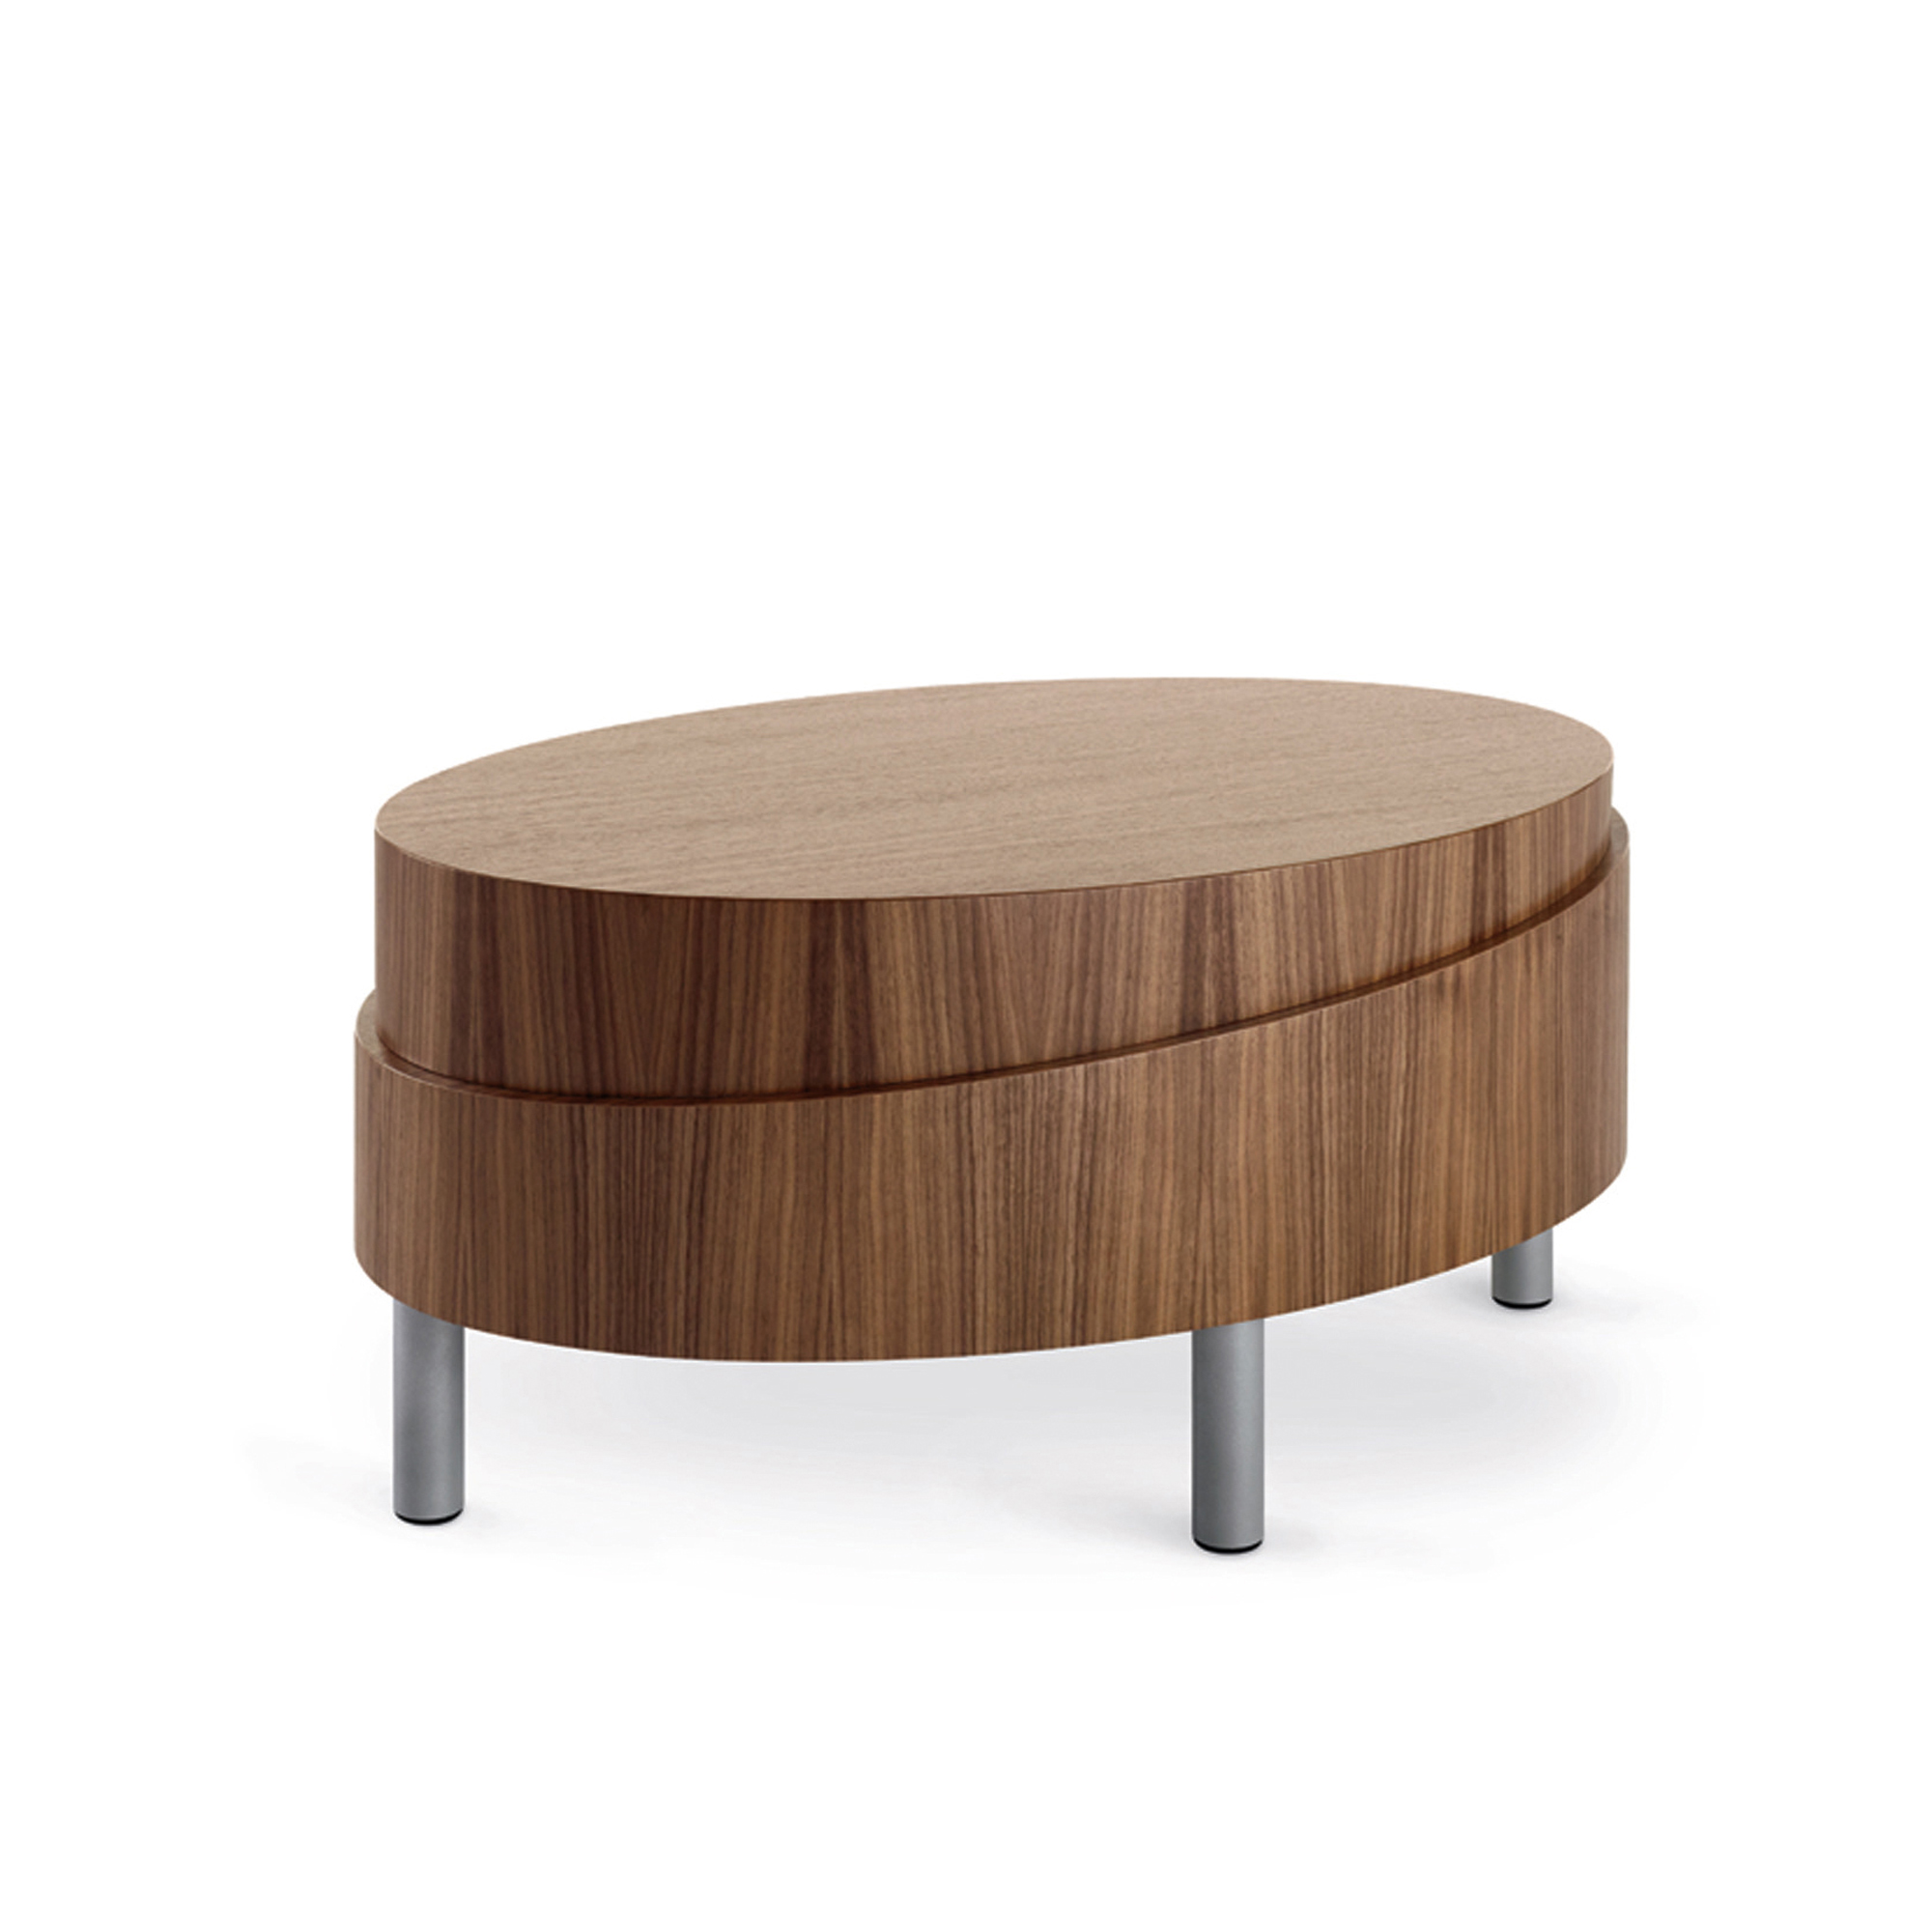 Soleil Occasional Tables - Arcadia Contract